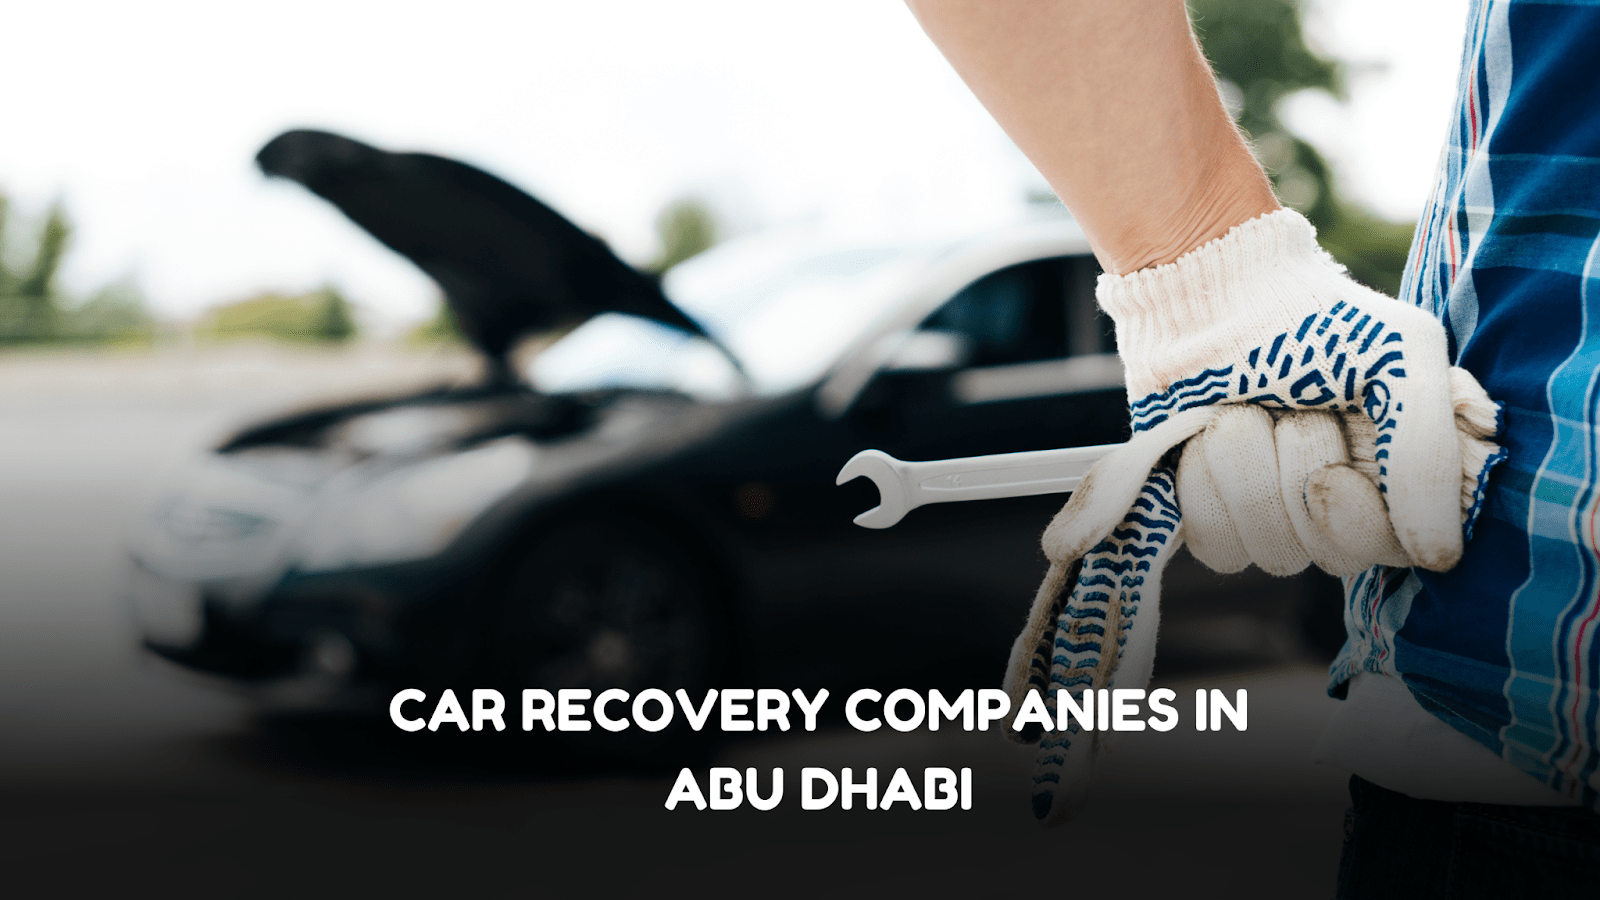 List of Companies Offering Car Recovery in Abu Dhabi